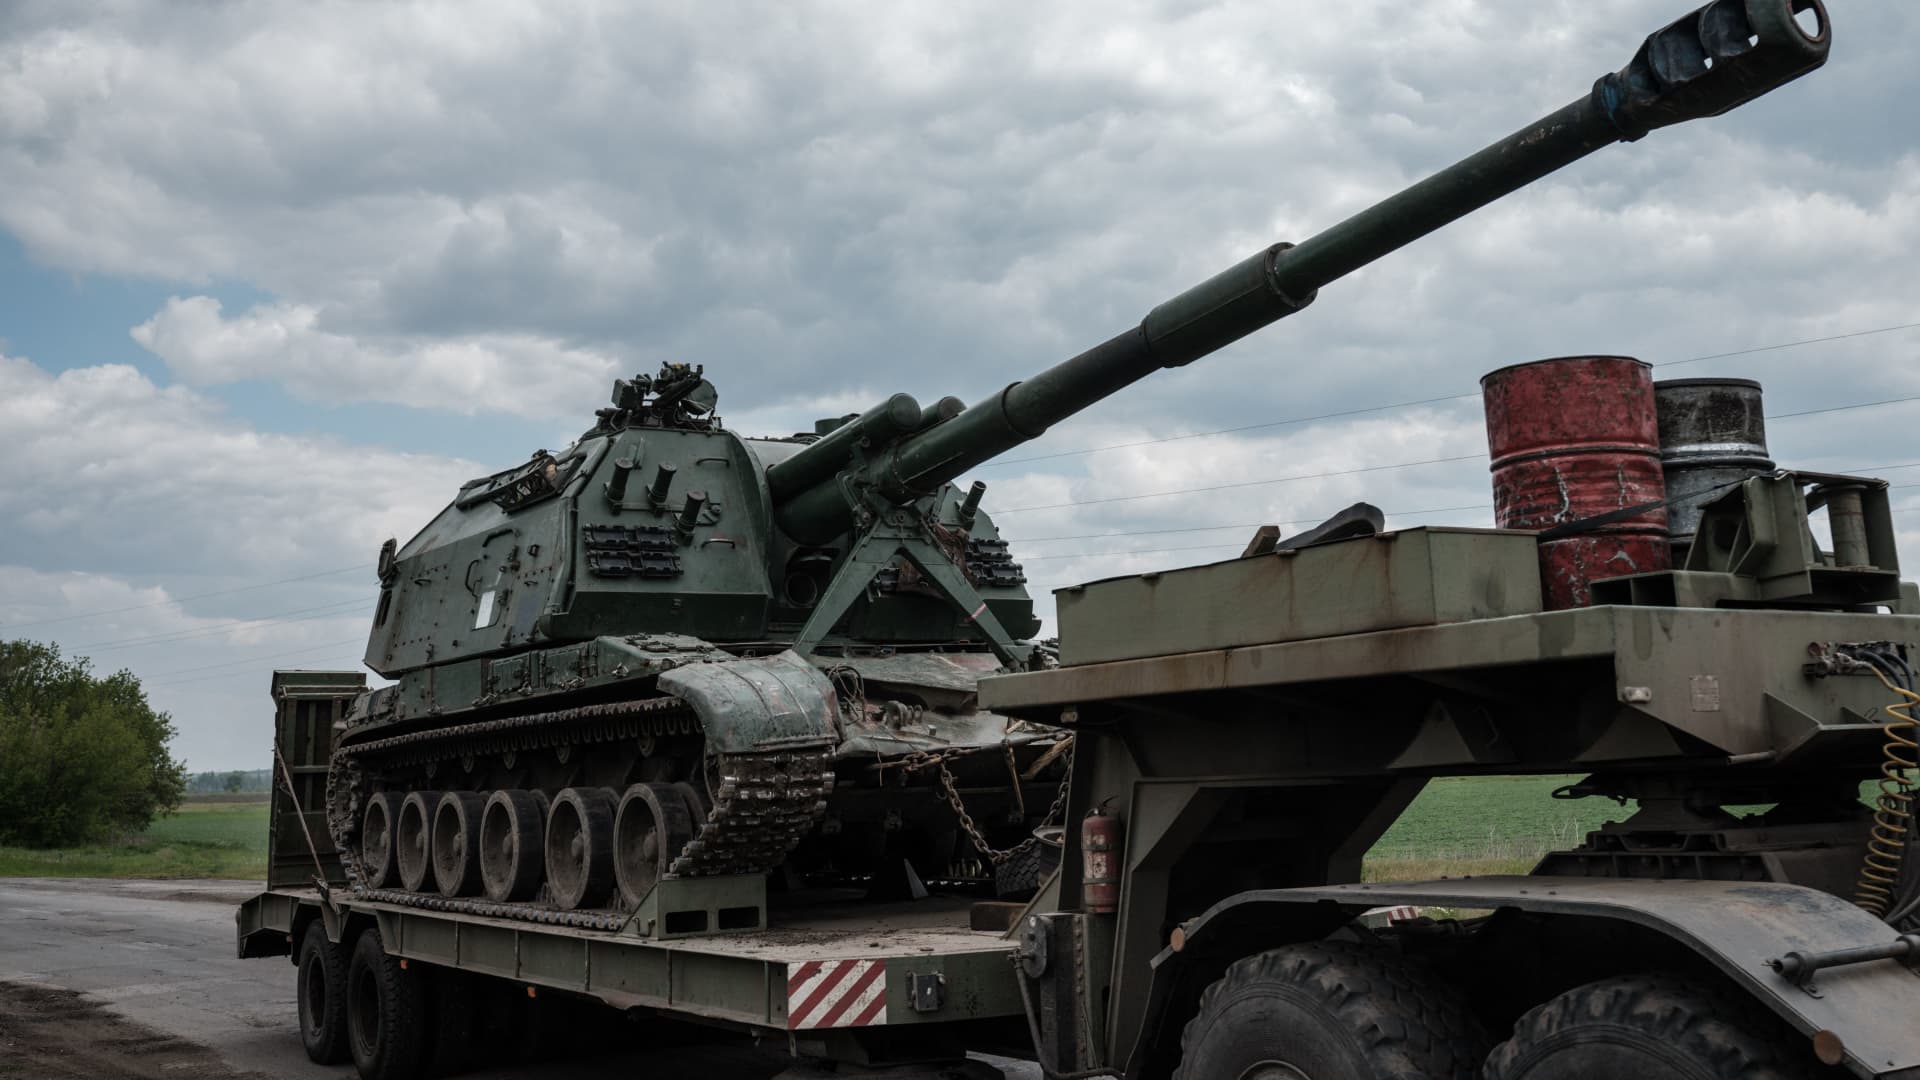 This photograph taken on May 10, 2022, shows a Ukrainian Army self-propelled howitzer loaded on a tank transporter near Bakhmut, eastern Ukraine.